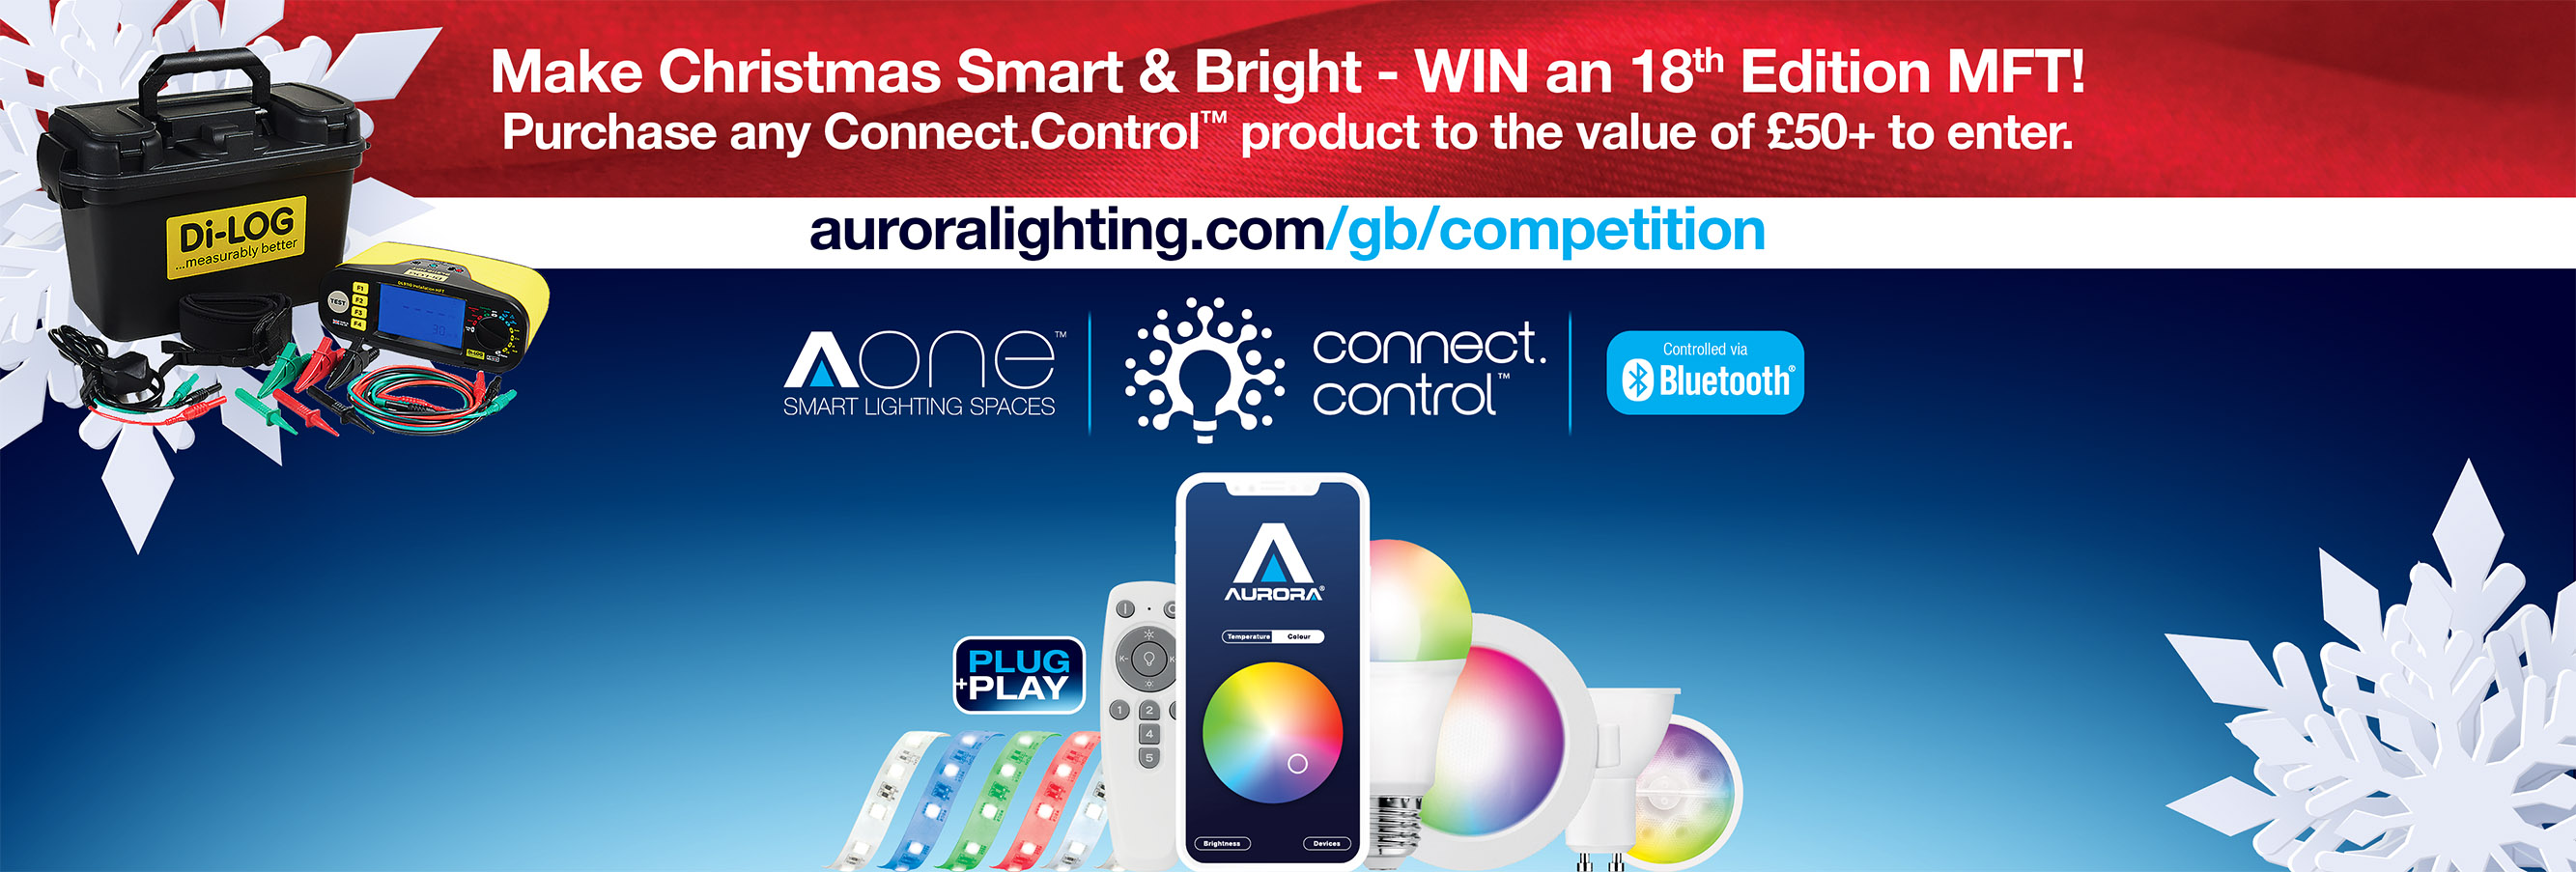 Show products in category WIN an 18th edition MFT for Xmas when you purchase any AOne™ Bluetooth Connect.Control™ Product (T&Cs apply)